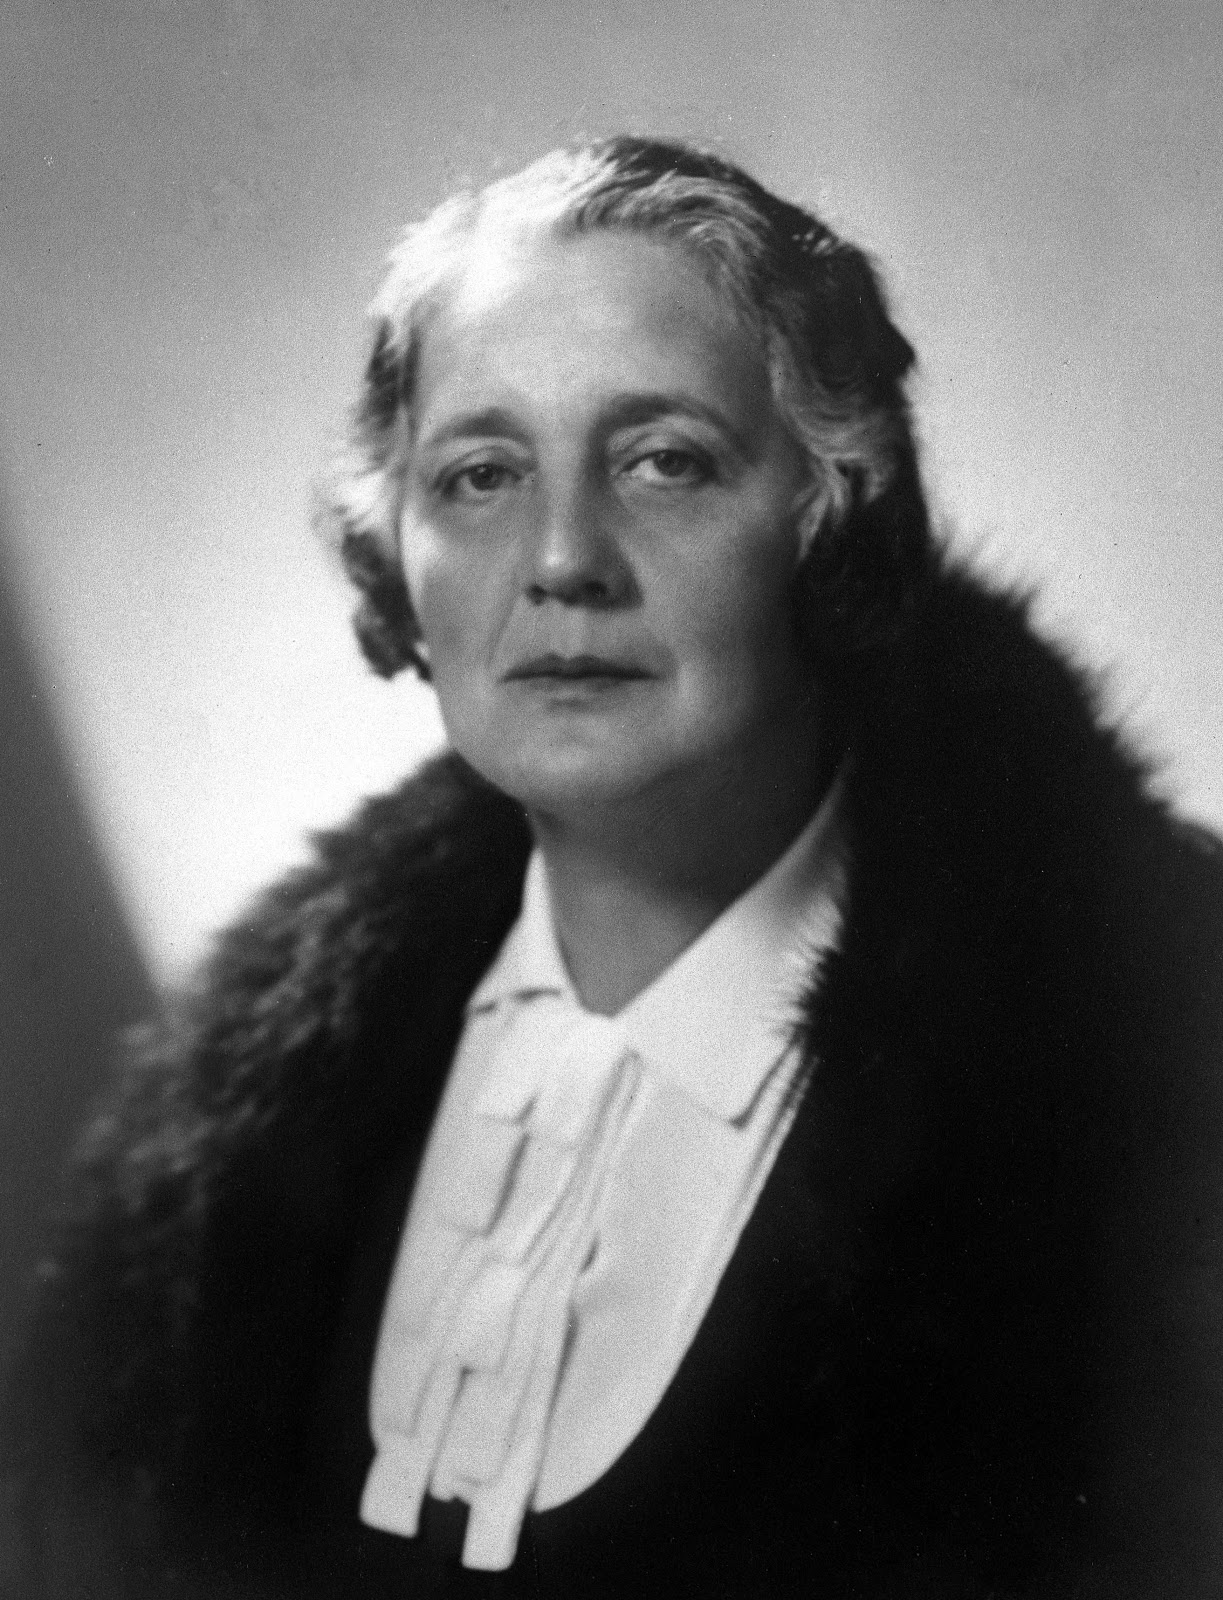 This is a black and white photograph taken of Melanie Klein in 1927. She is wearing a white and black top, and she is looking directly at the camera.